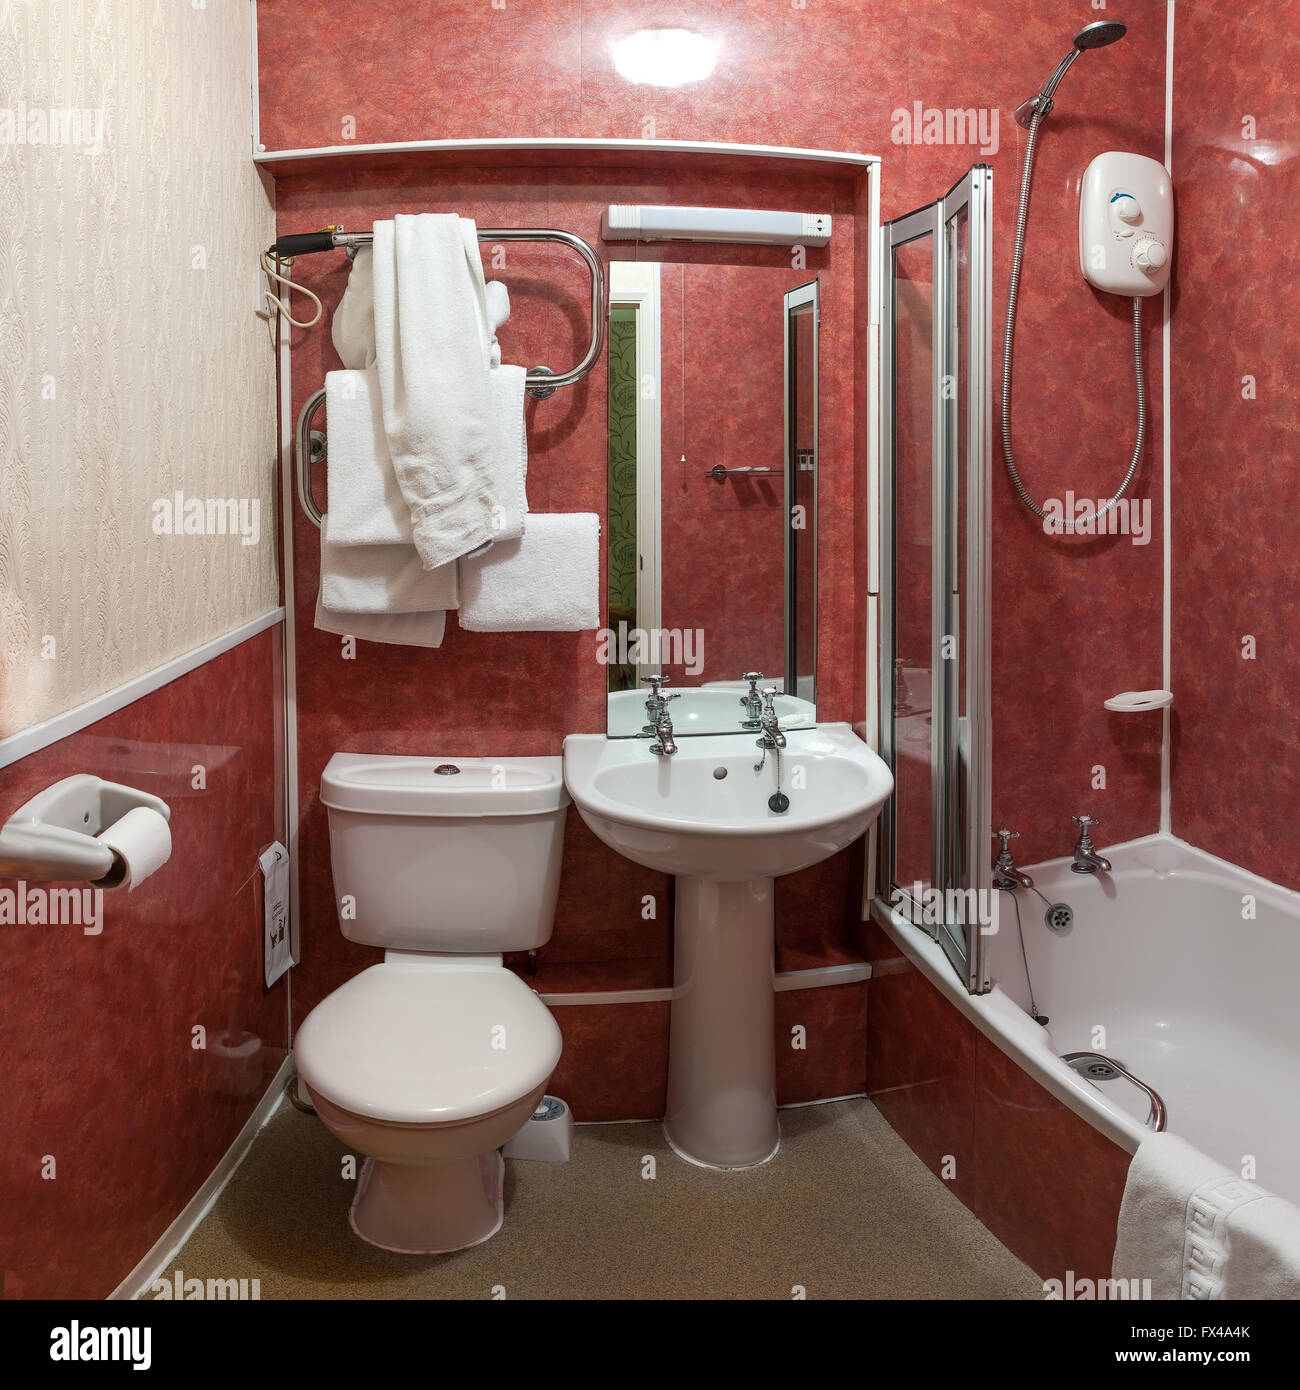 Hotel bathroom showing toilet, washbasin, bath and shower with towels ready. Stock Photo